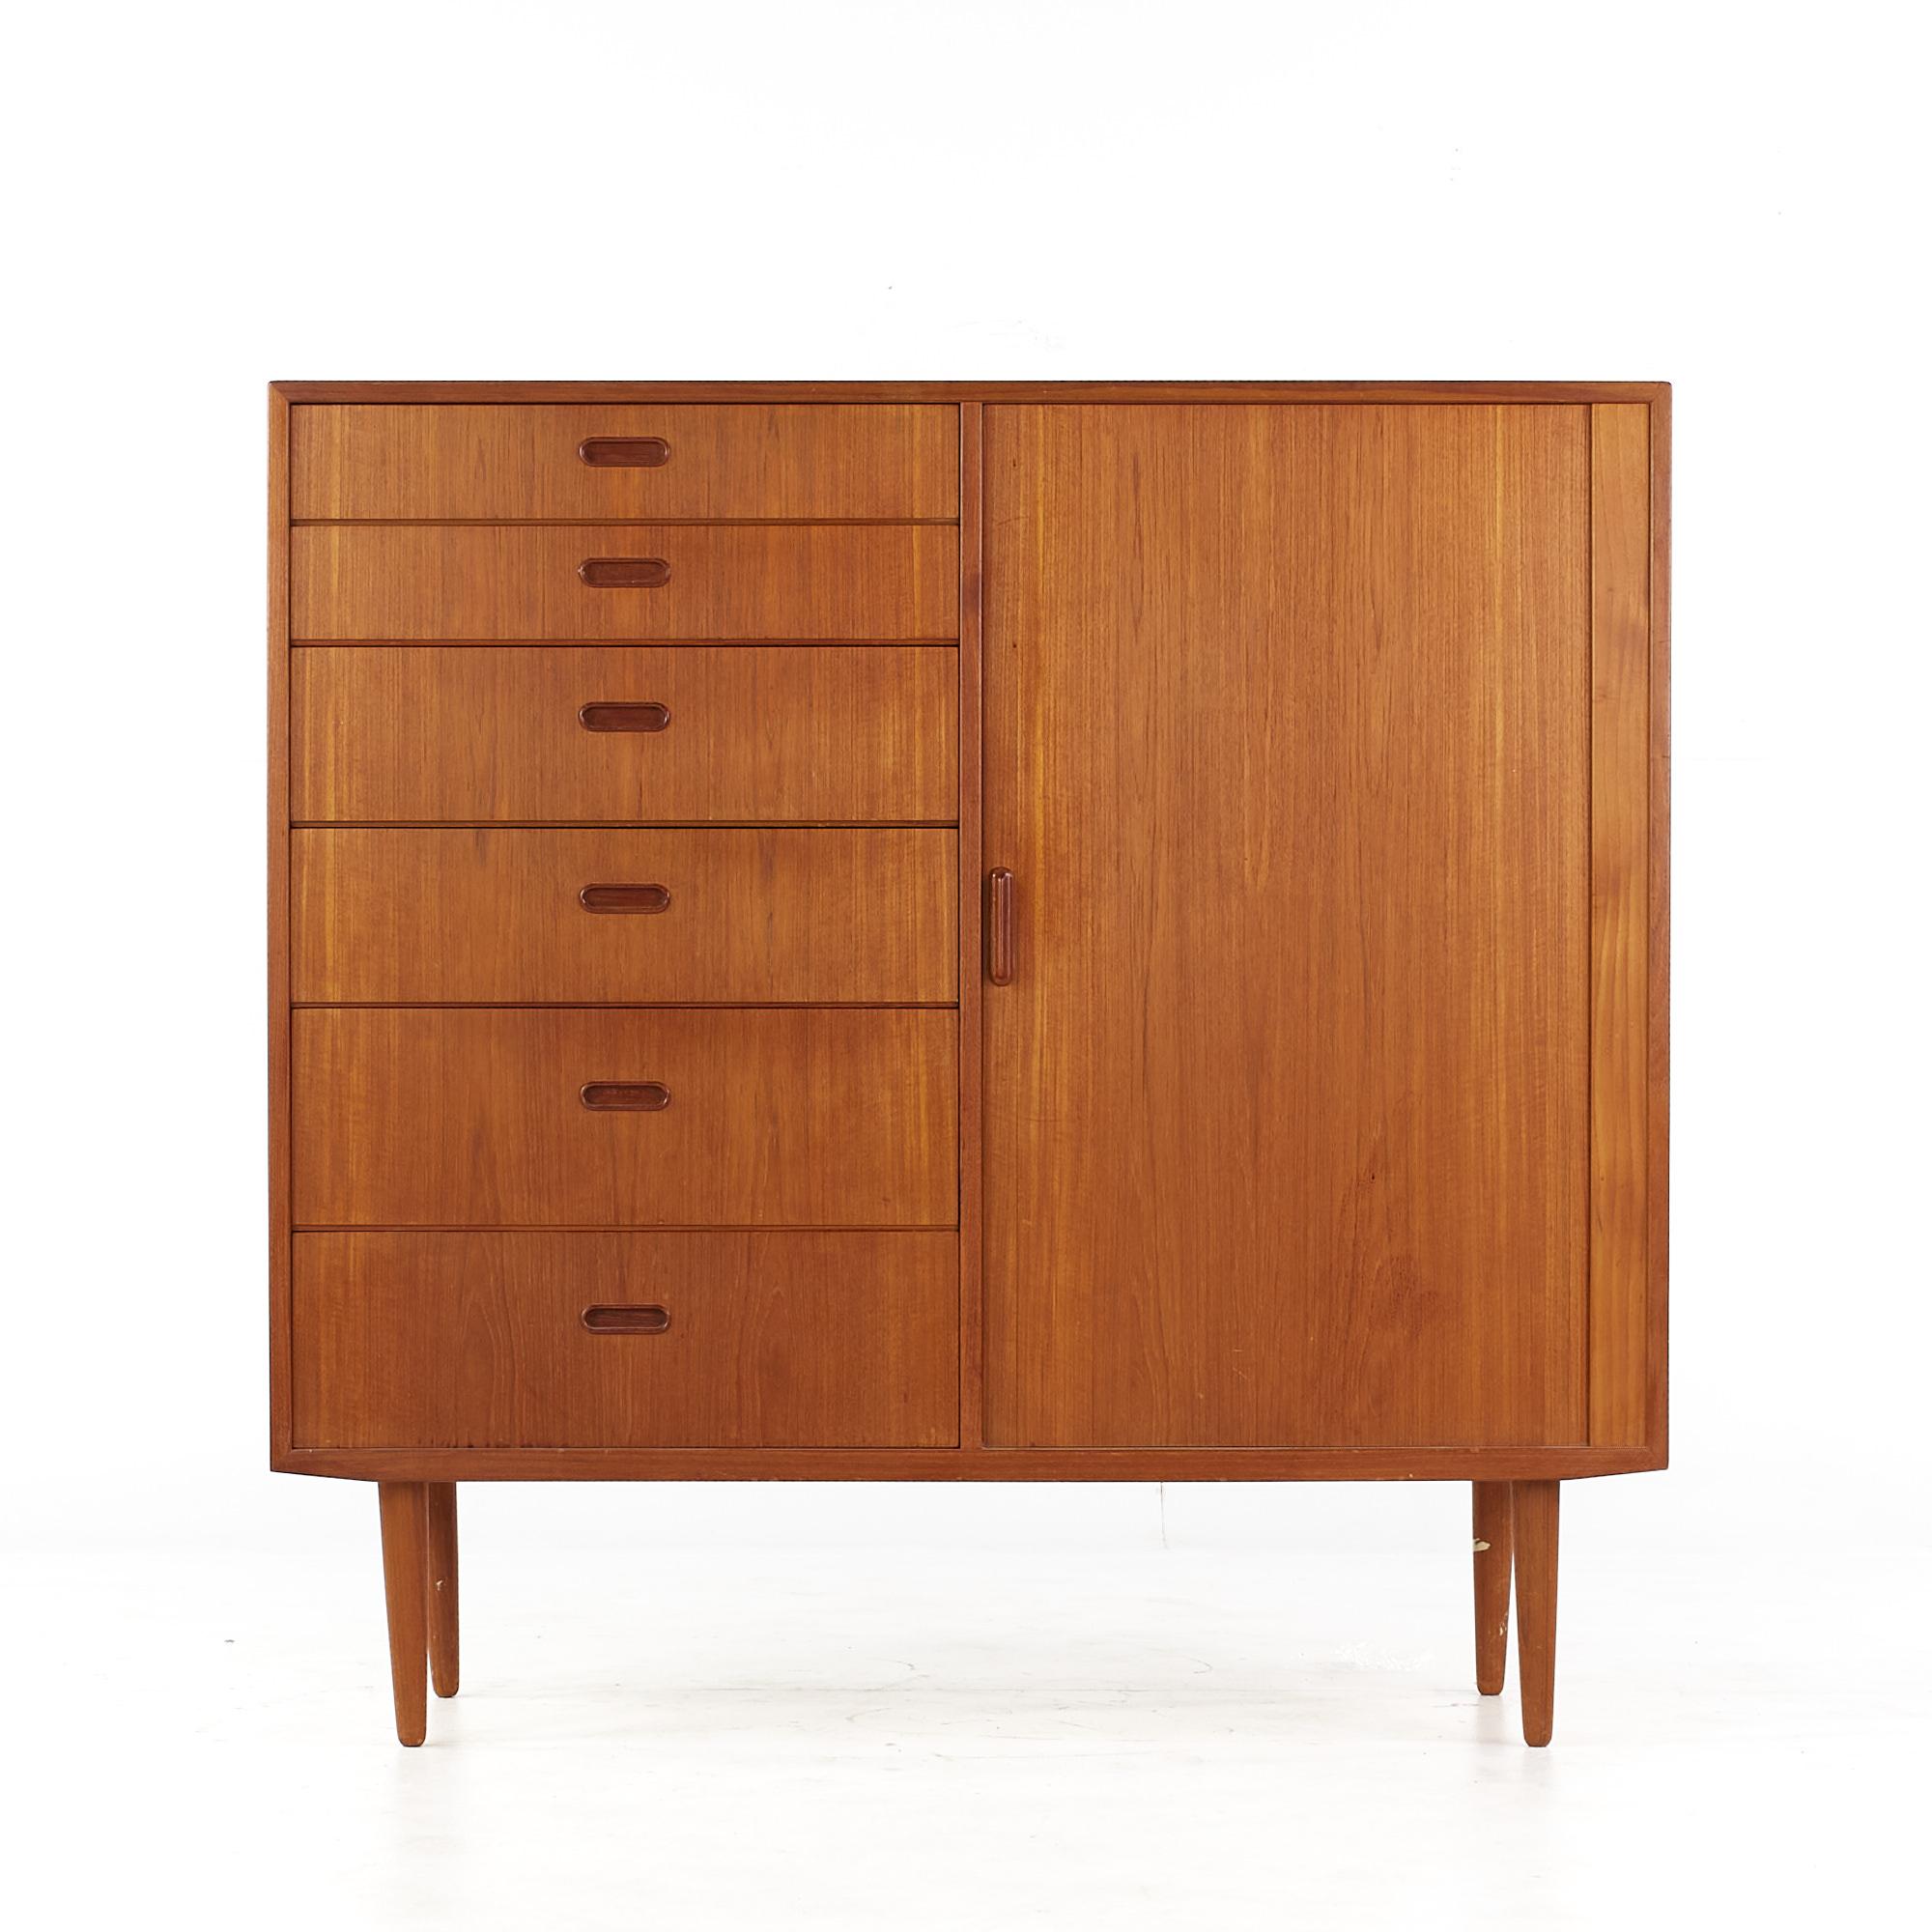 Svend Madsen style falster mid century teak tambour door gentlemans chest

This gentlemans chest measures: 48 wide x 17.75 deep x 47 inches high

All pieces of furniture can be had in what we call restored vintage condition. That means the piece